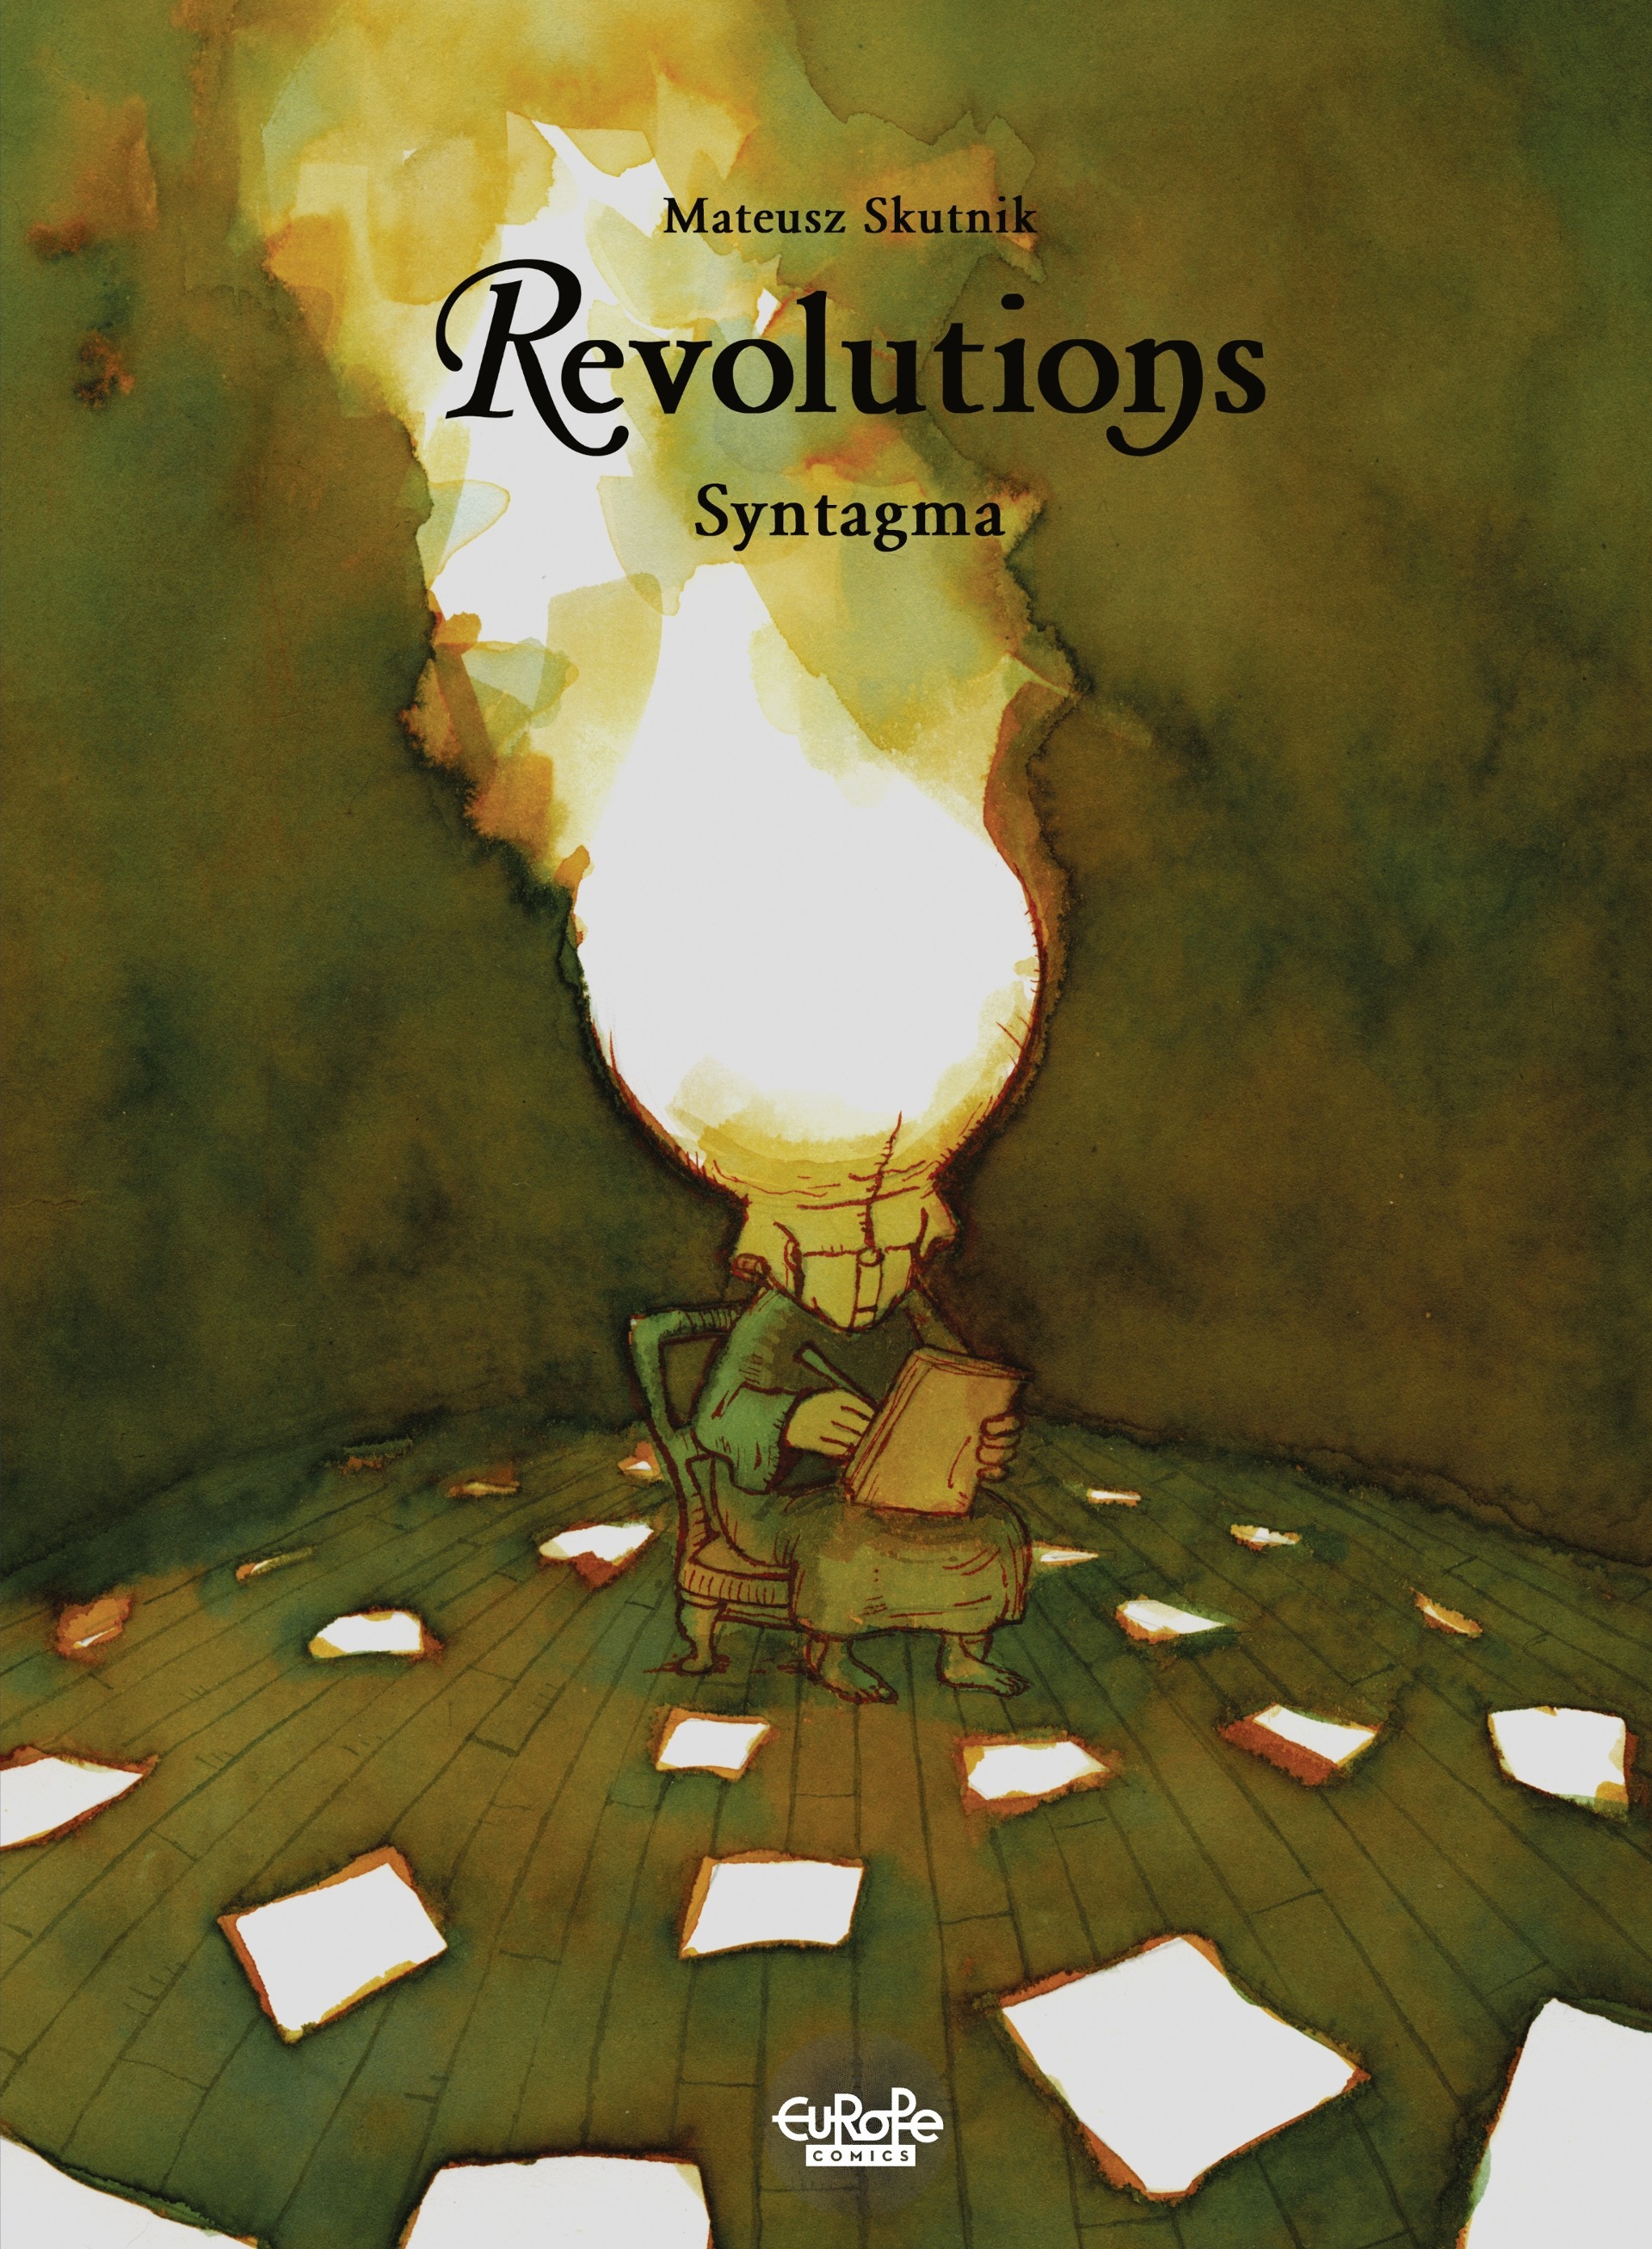 Read online Revolutions comic -  Issue #4 - 1